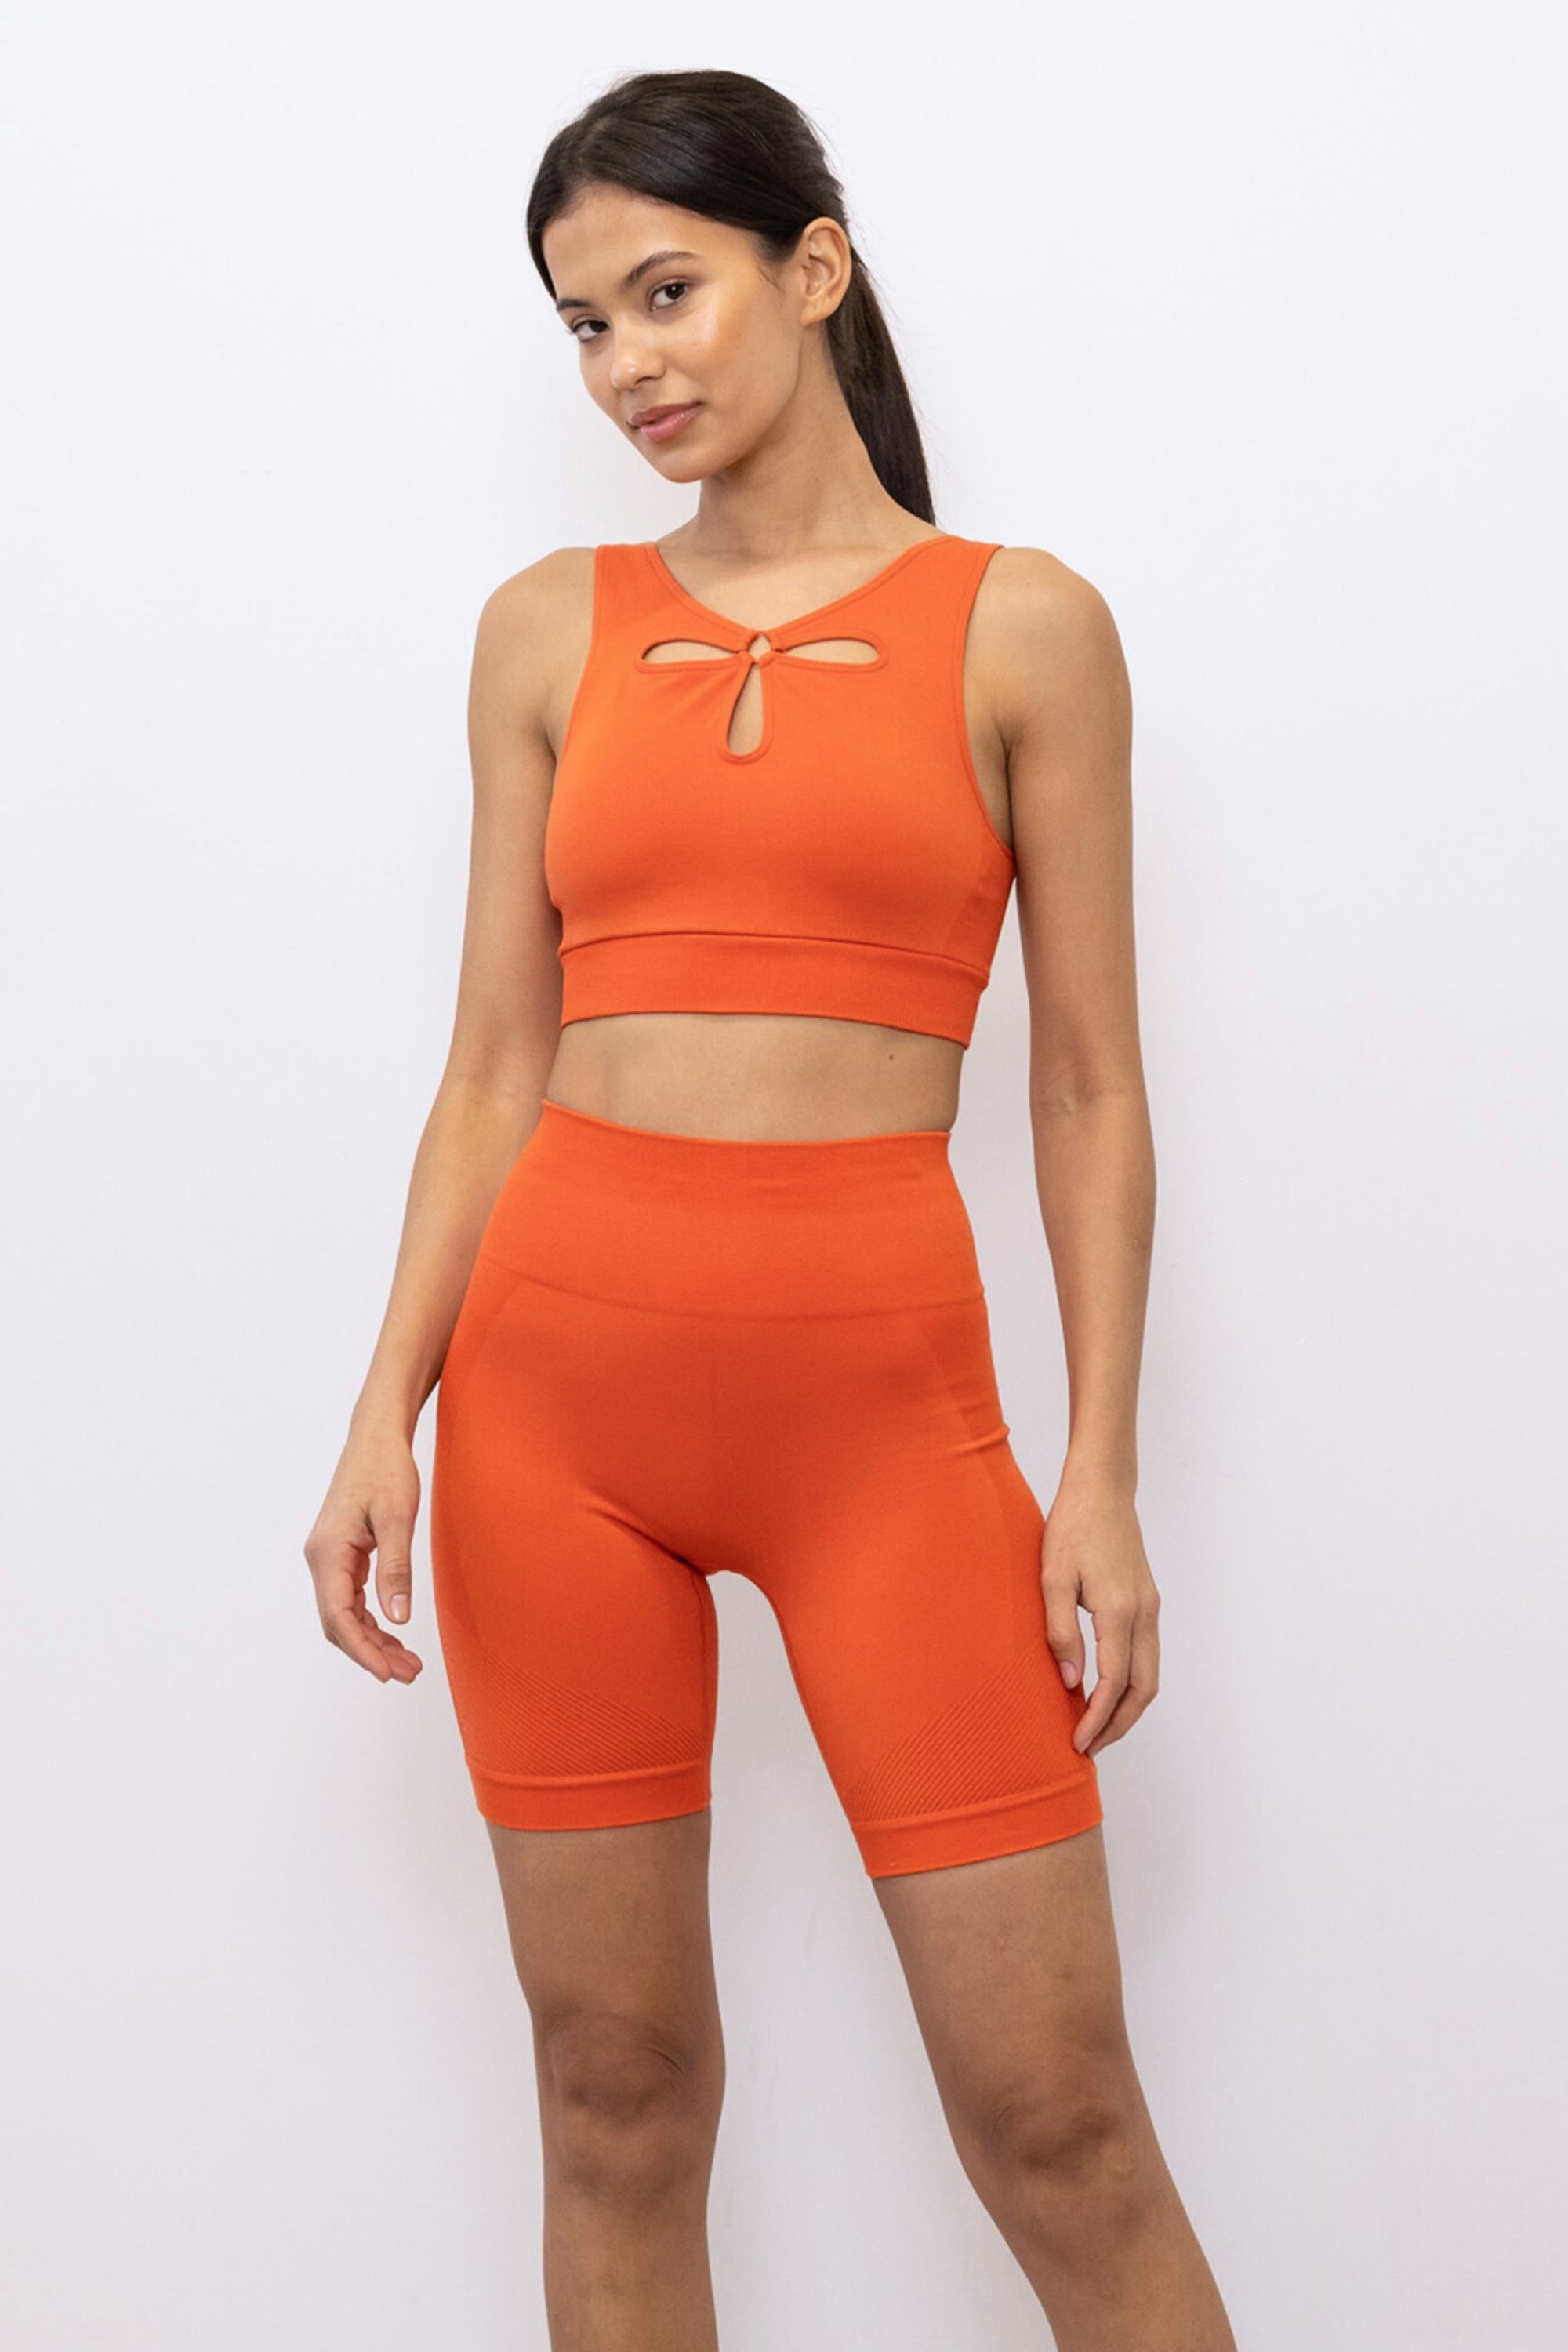 Bright orange ribbed recycled modal shorts and padded supportive sculpting sports bra for running, yoga, gym and pilates from sustainable activewear brand Jilla Active Edit alt text